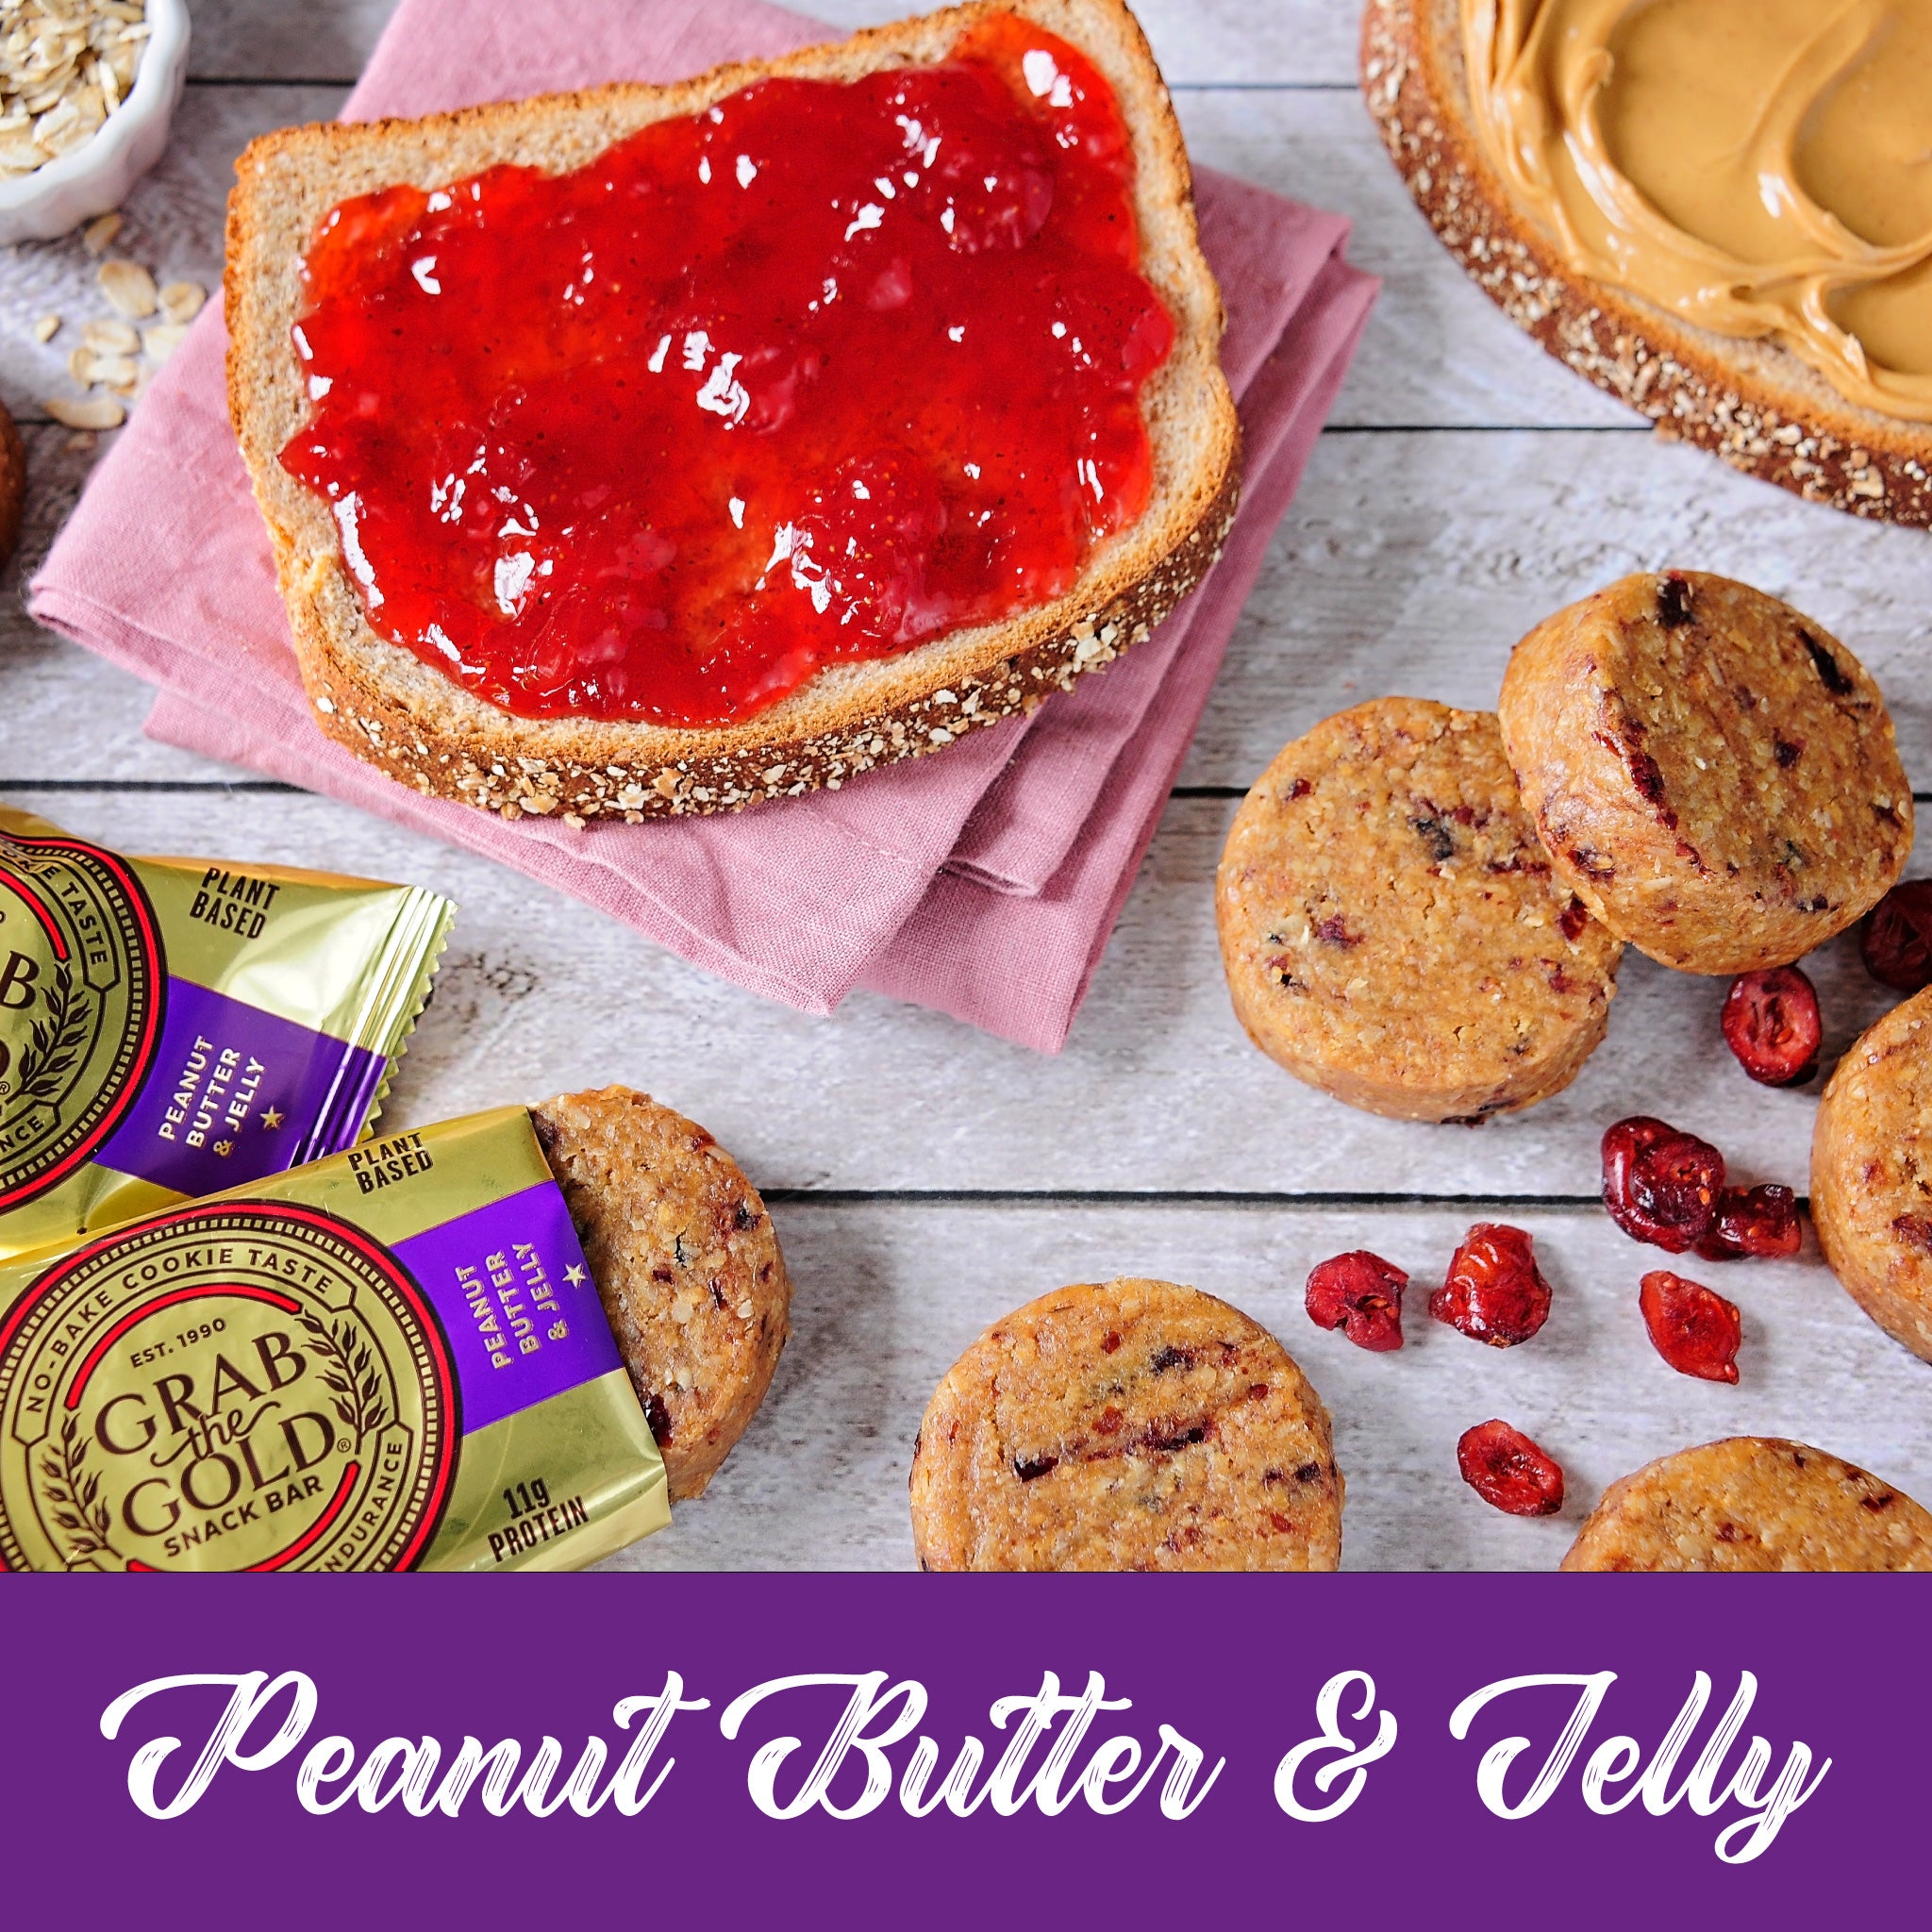 12 Snack Bars - Peanut Butter & Jelly